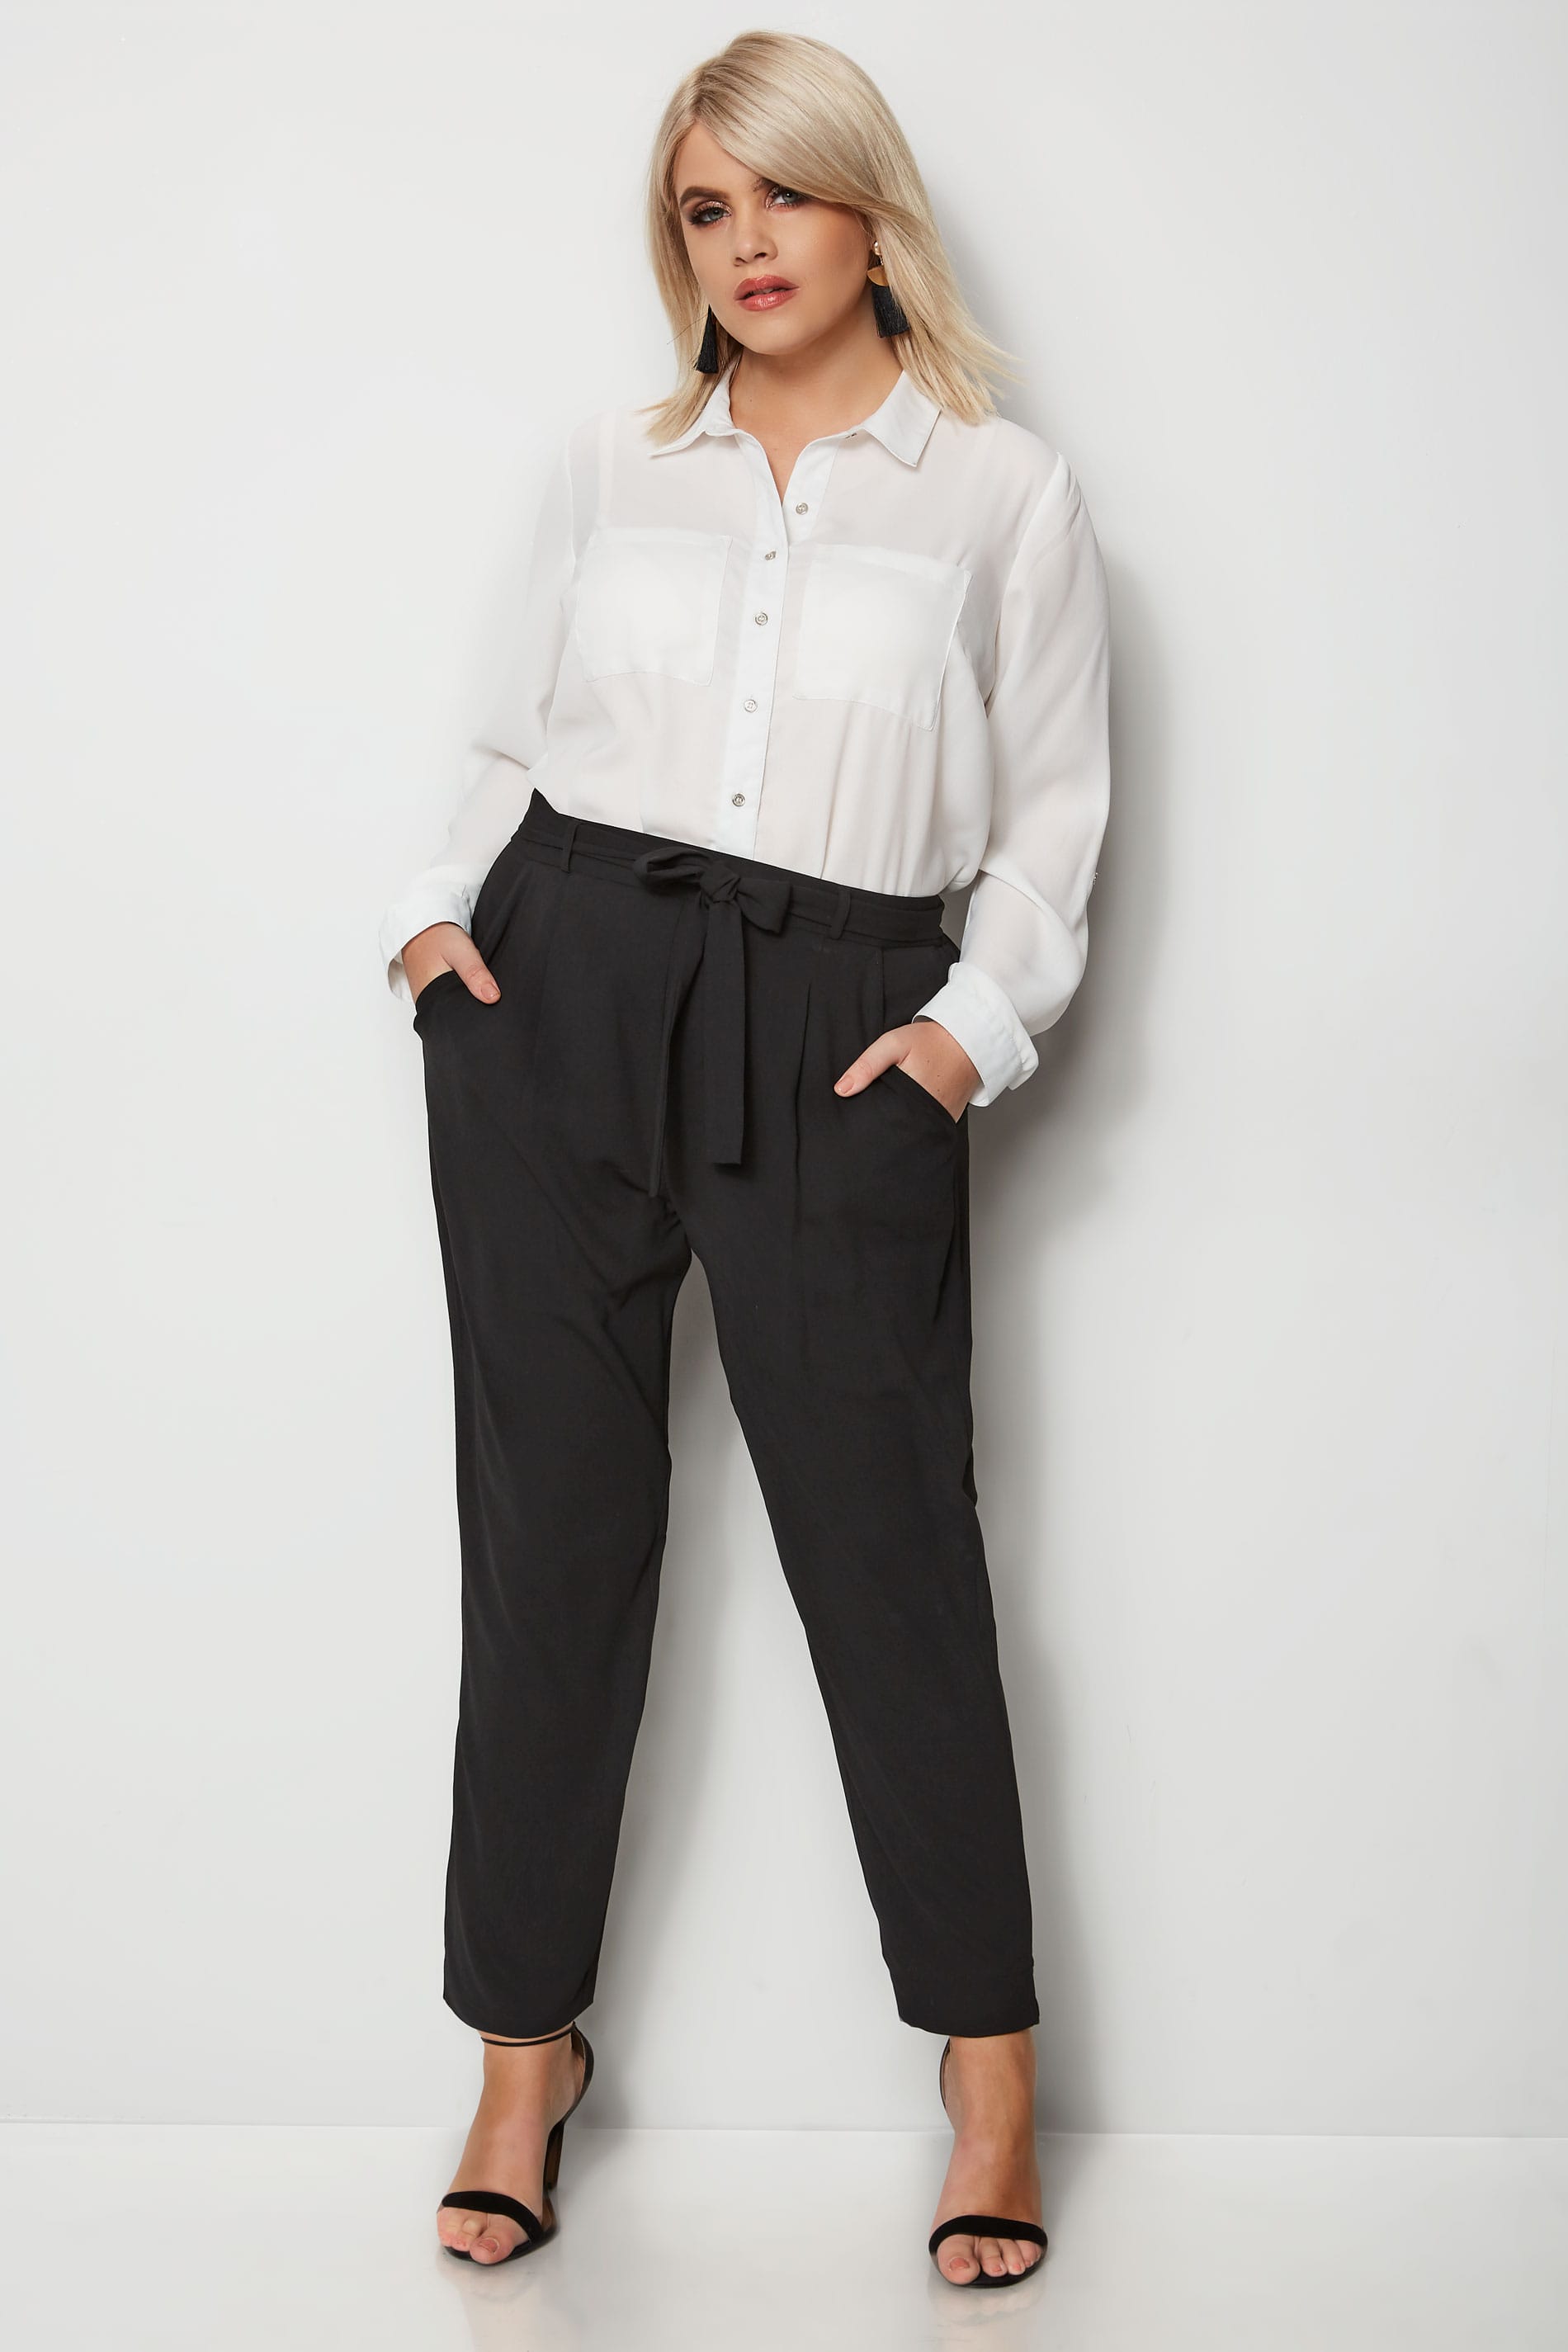 Black Crepe Tapered Trousers, plus size 16 to 36  2